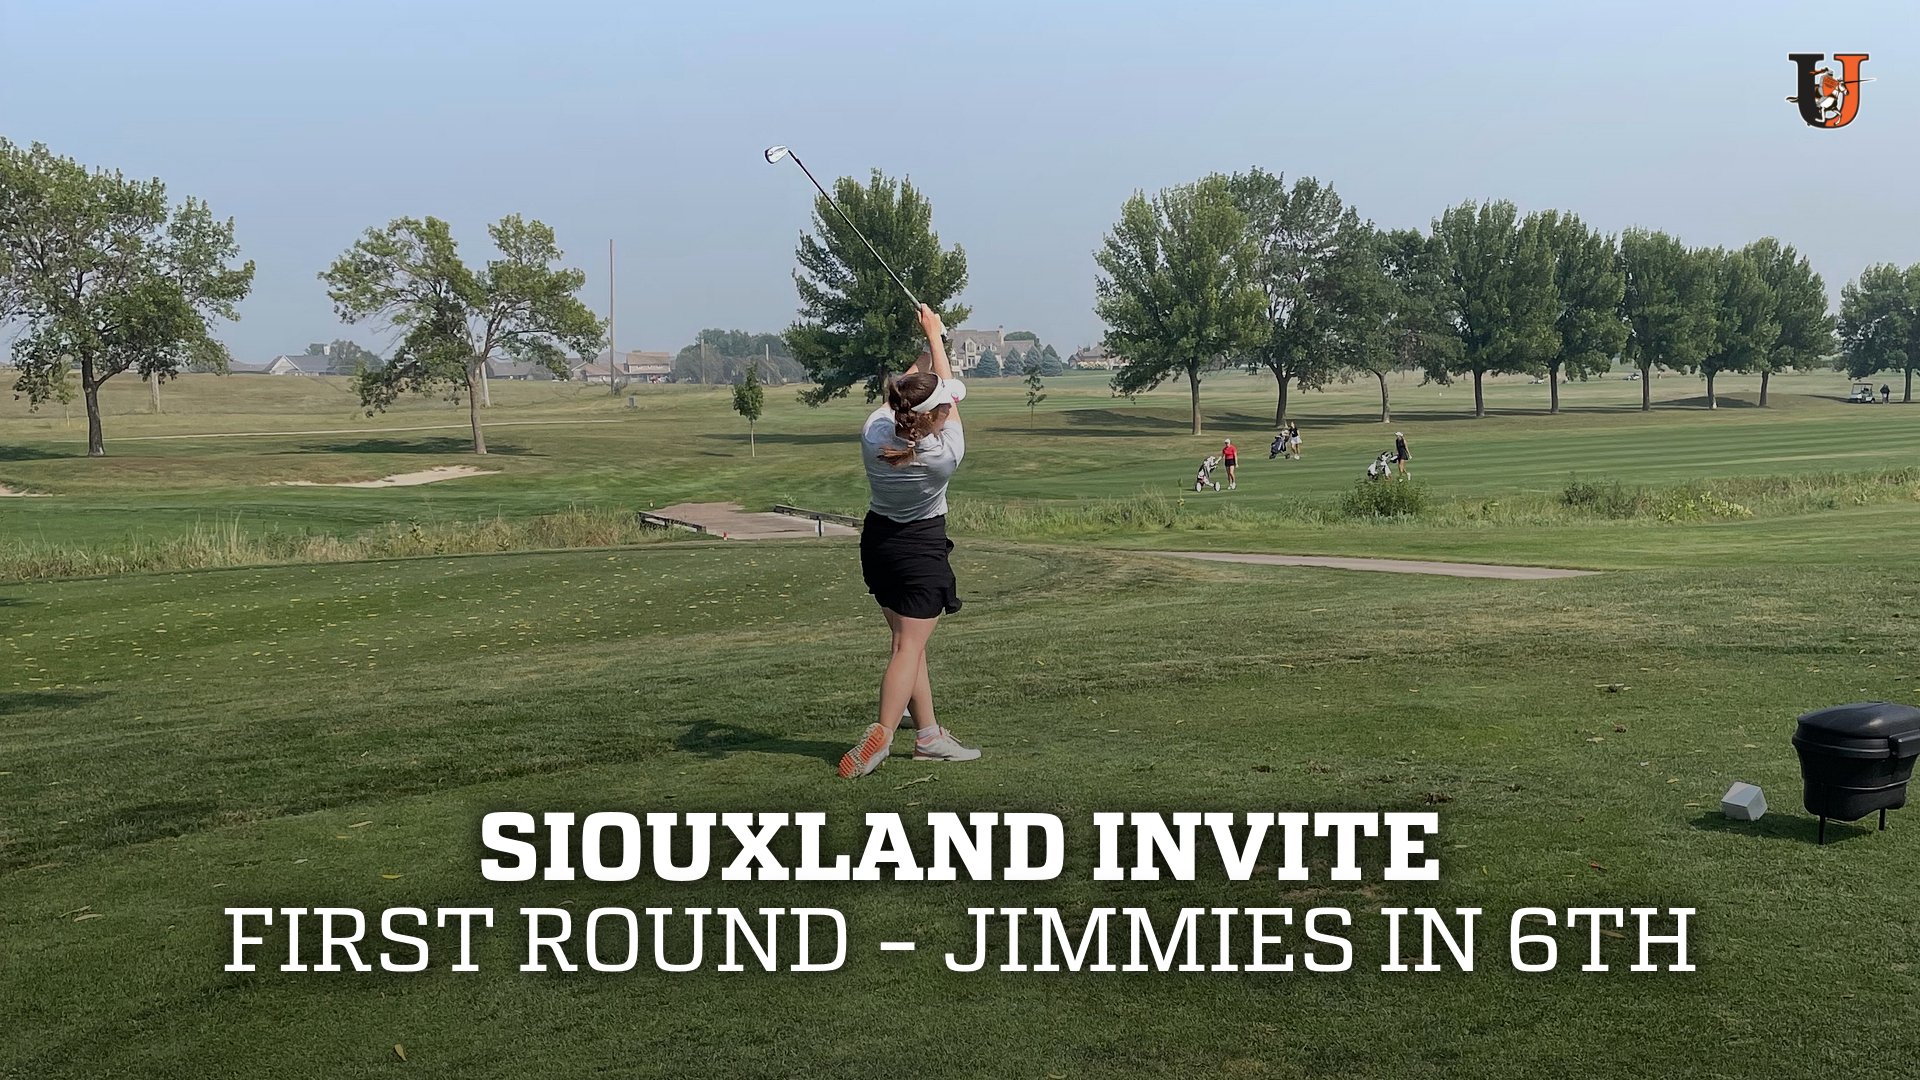 Jimmies 6th after first round of Siouxland Invite